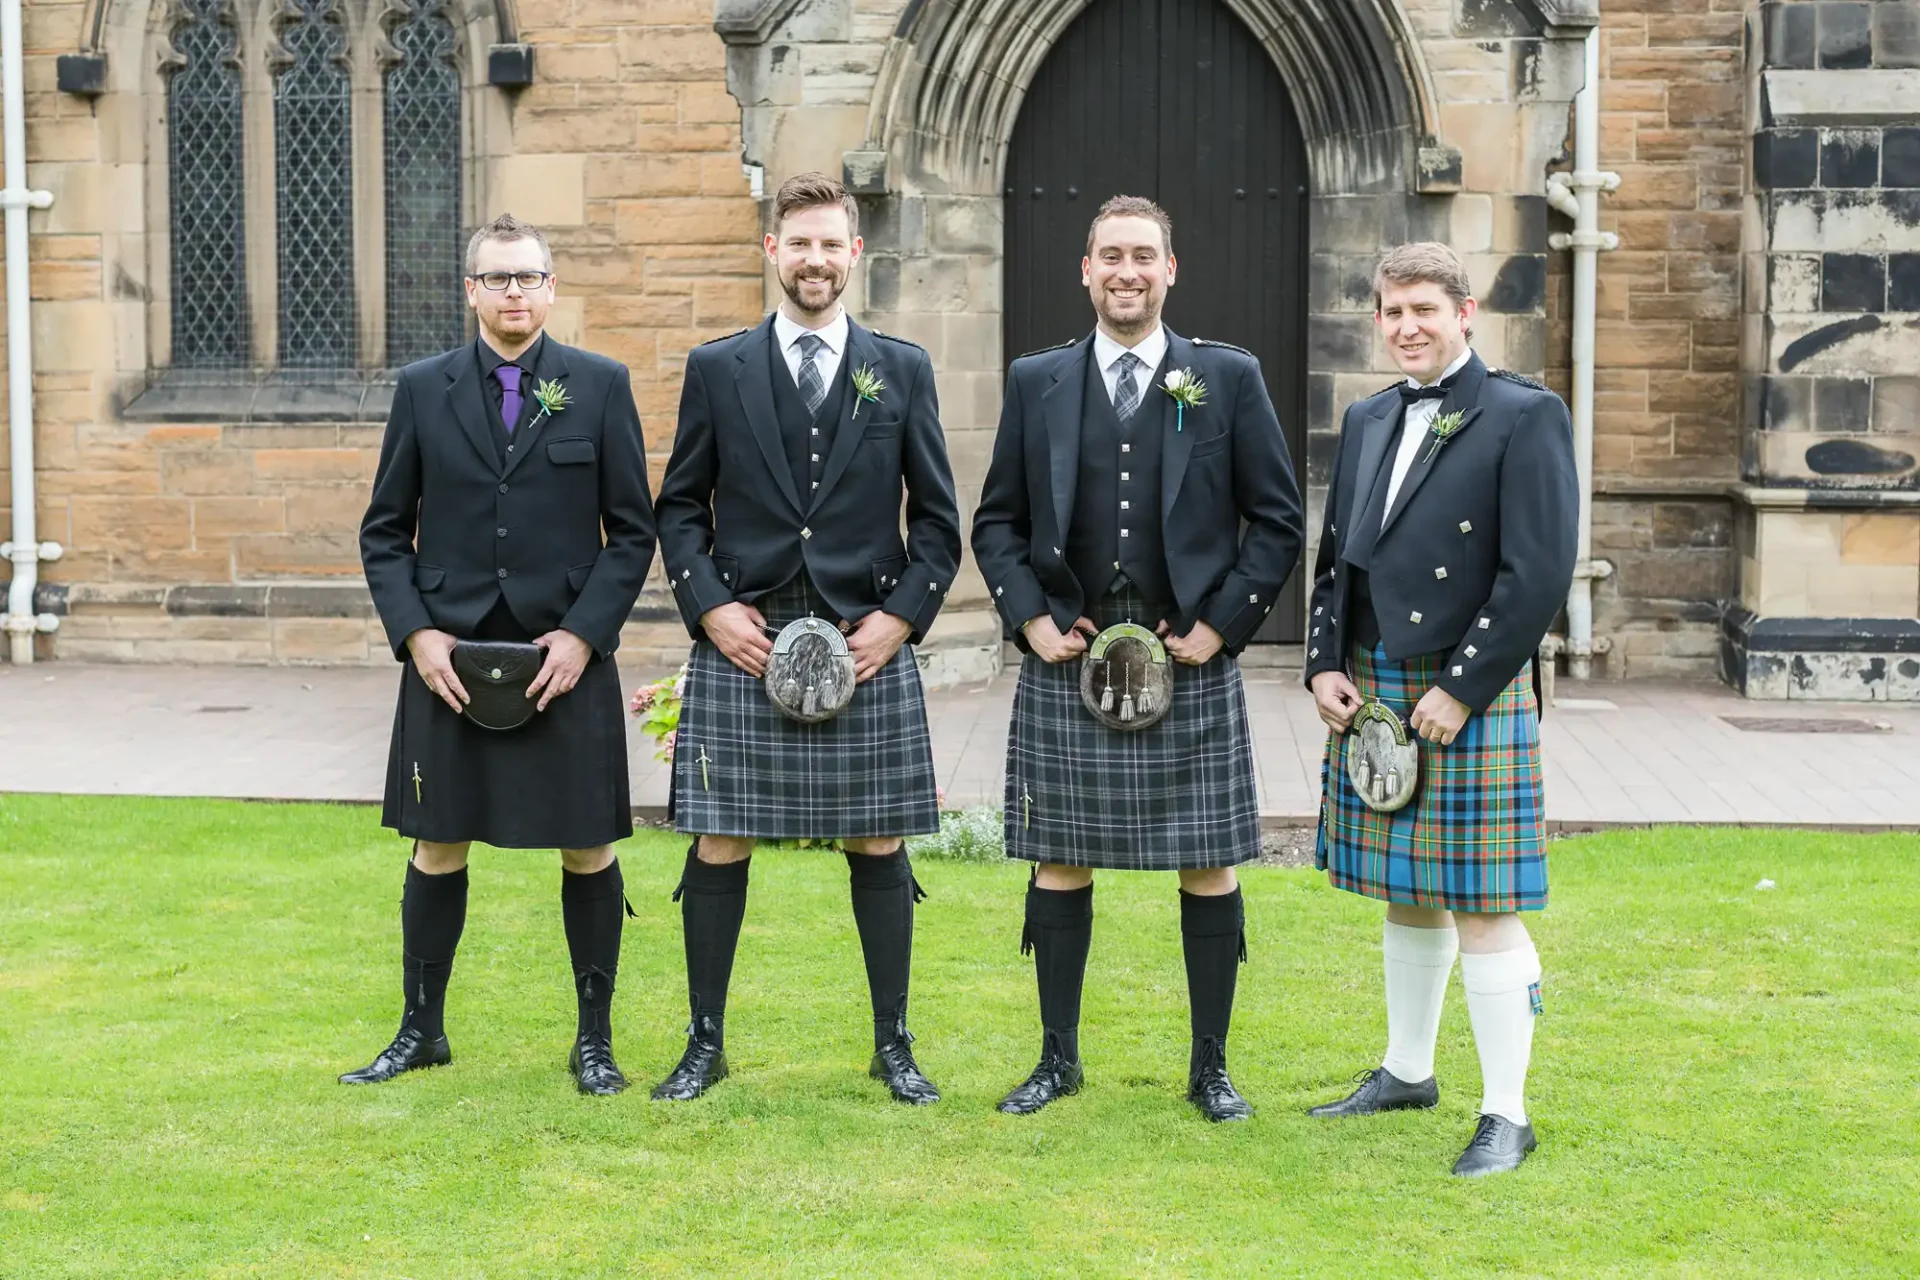 Four men in traditional scottish kilts standing in front of a stone church, smiling at the camera.